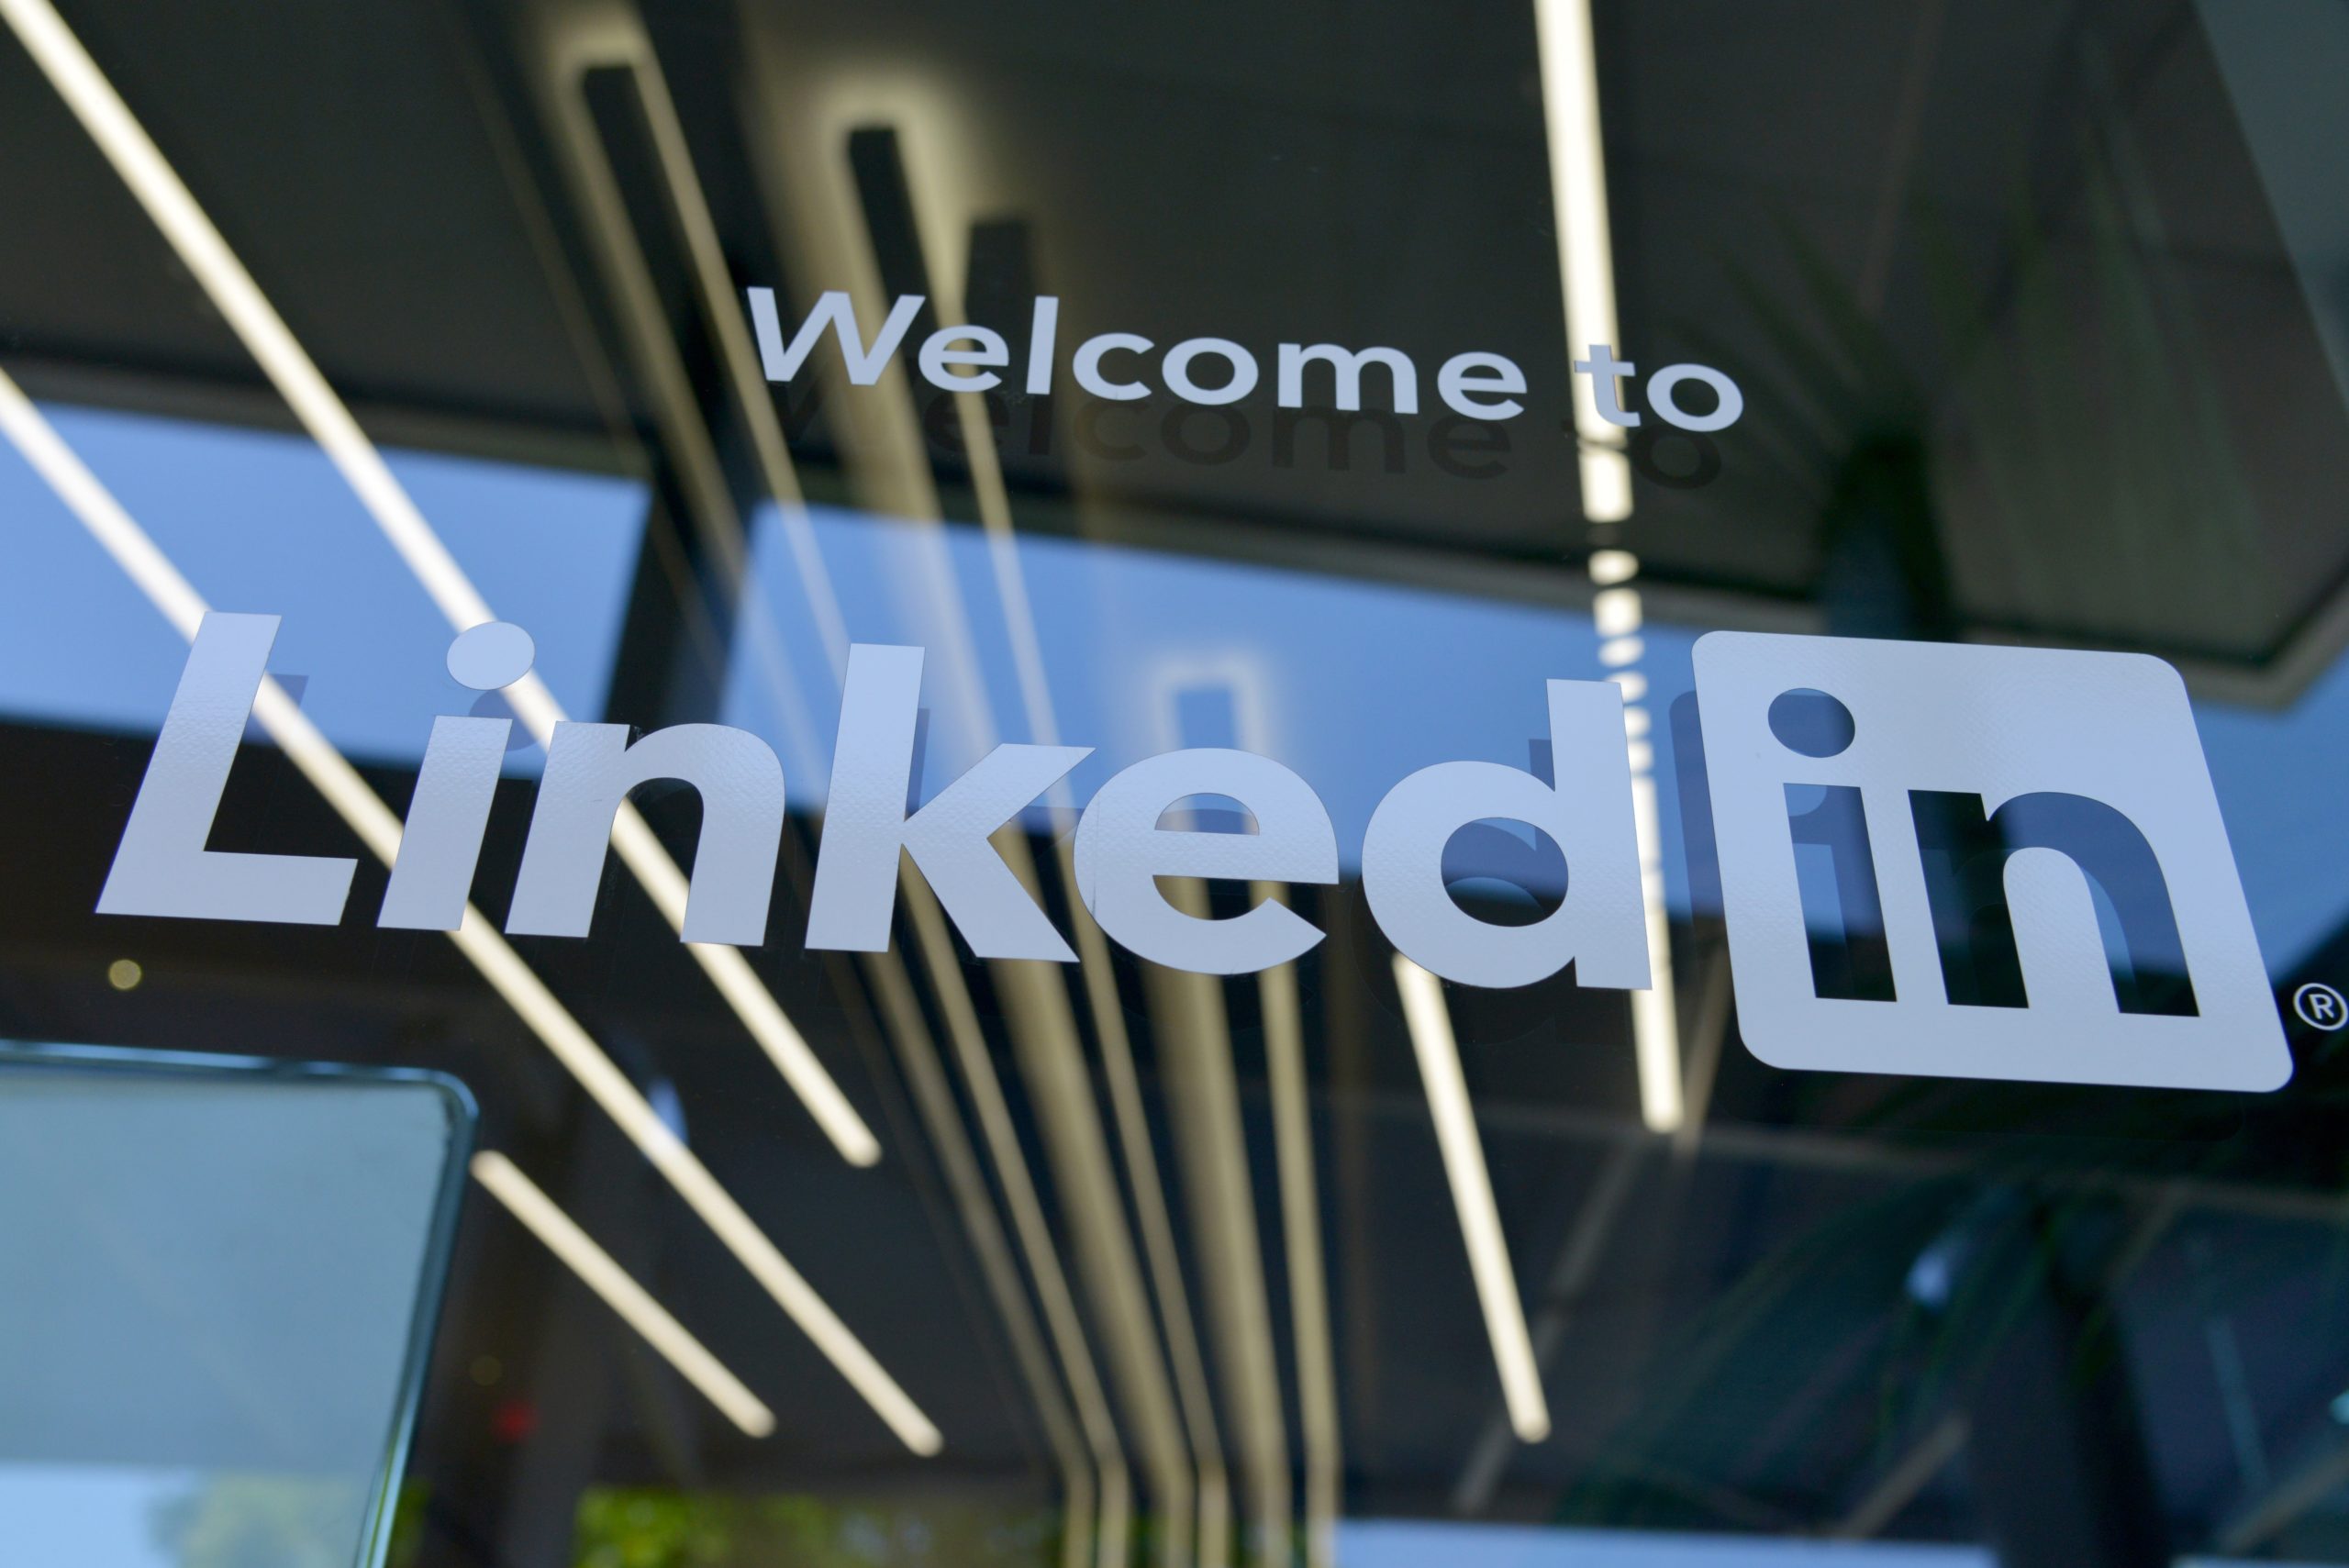 Welcome to LinkedIn sign: How to use LinkedIn as a freelance marketer